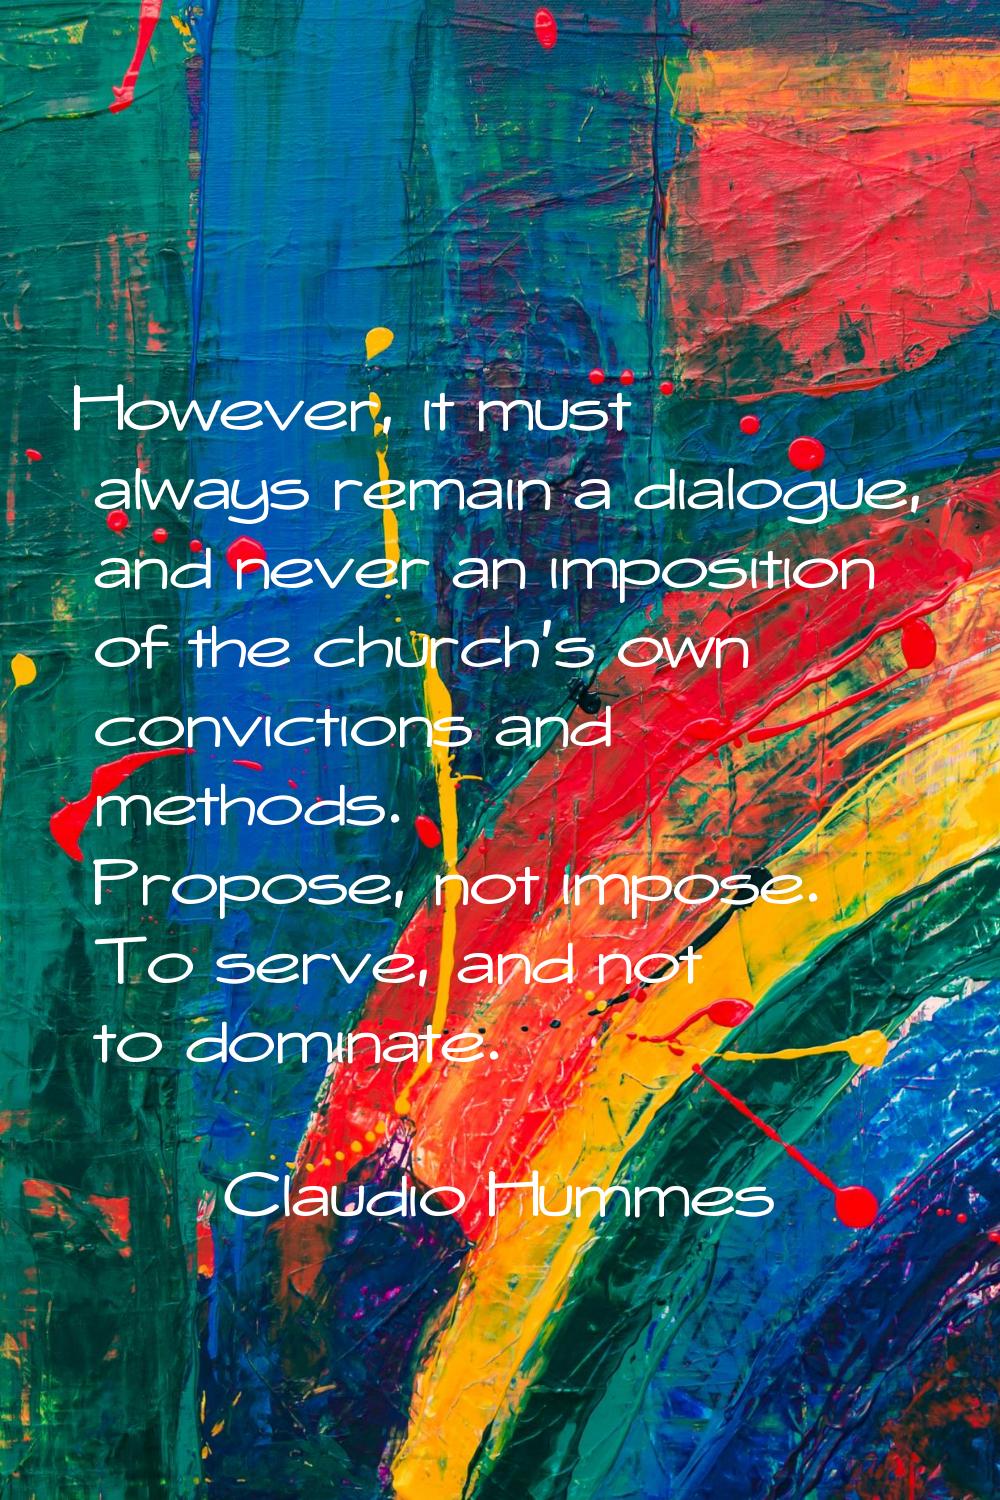 However, it must always remain a dialogue, and never an imposition of the church's own convictions 